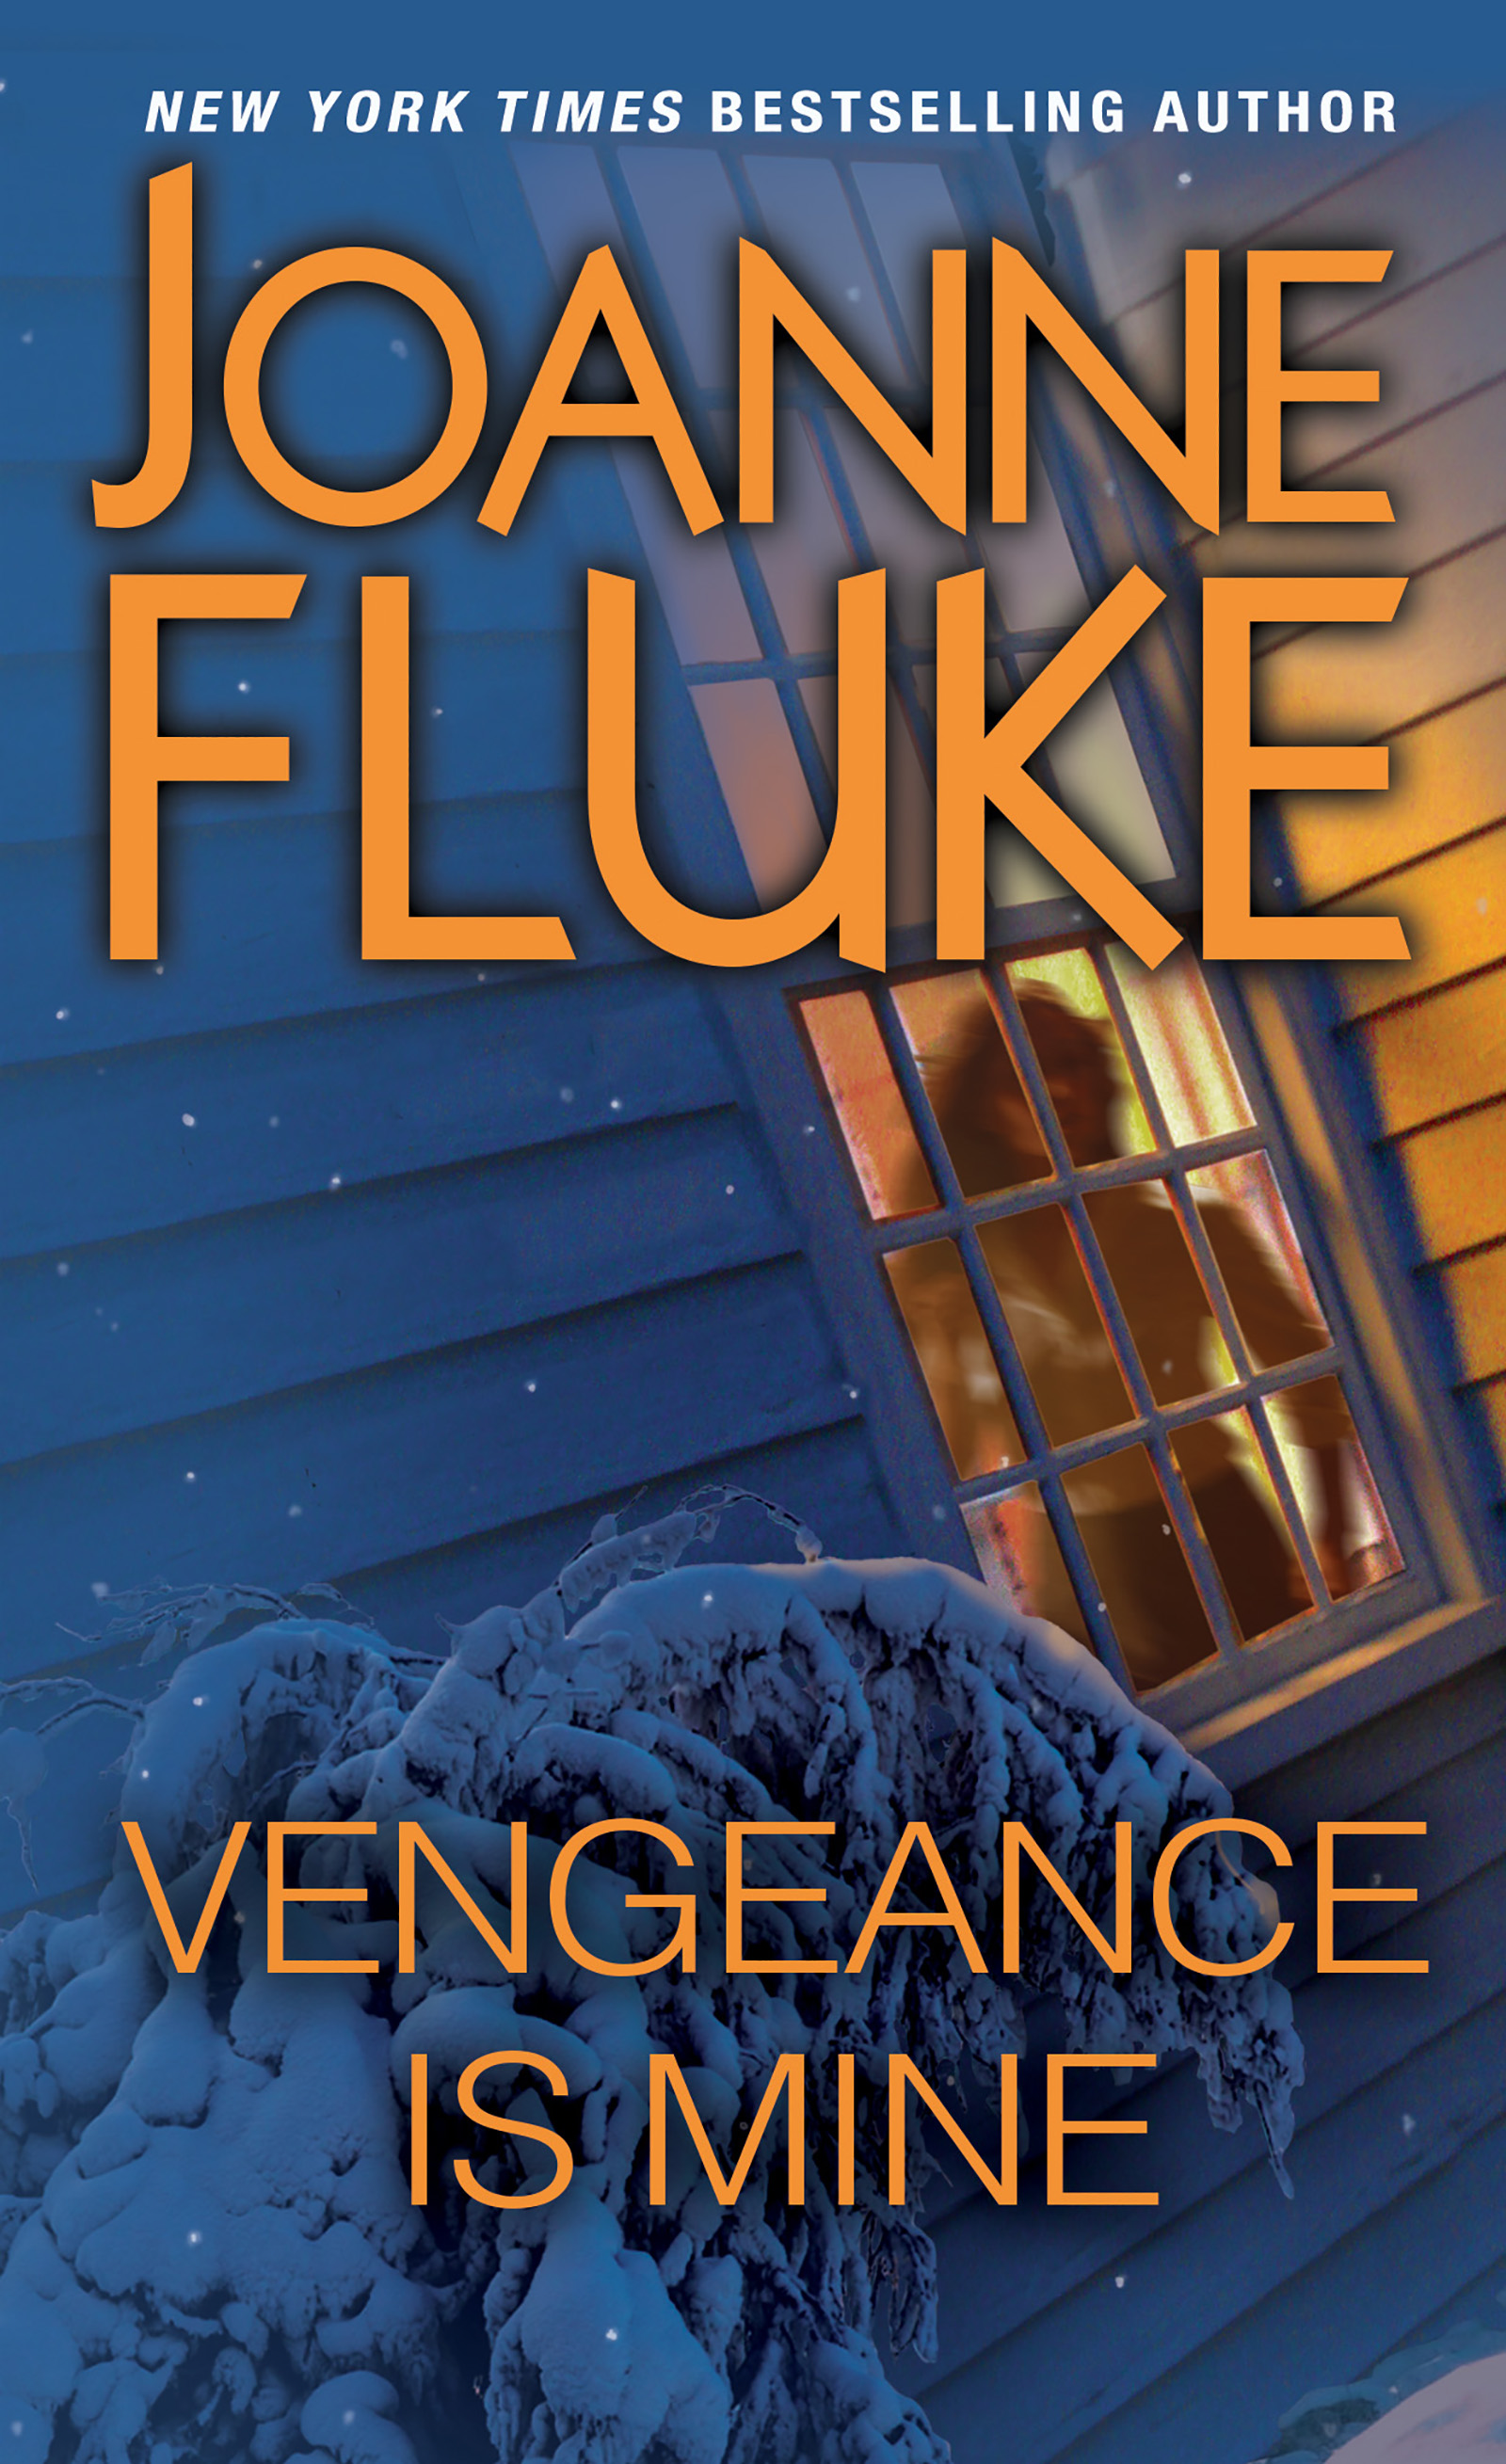 Vengeance is mine cover image